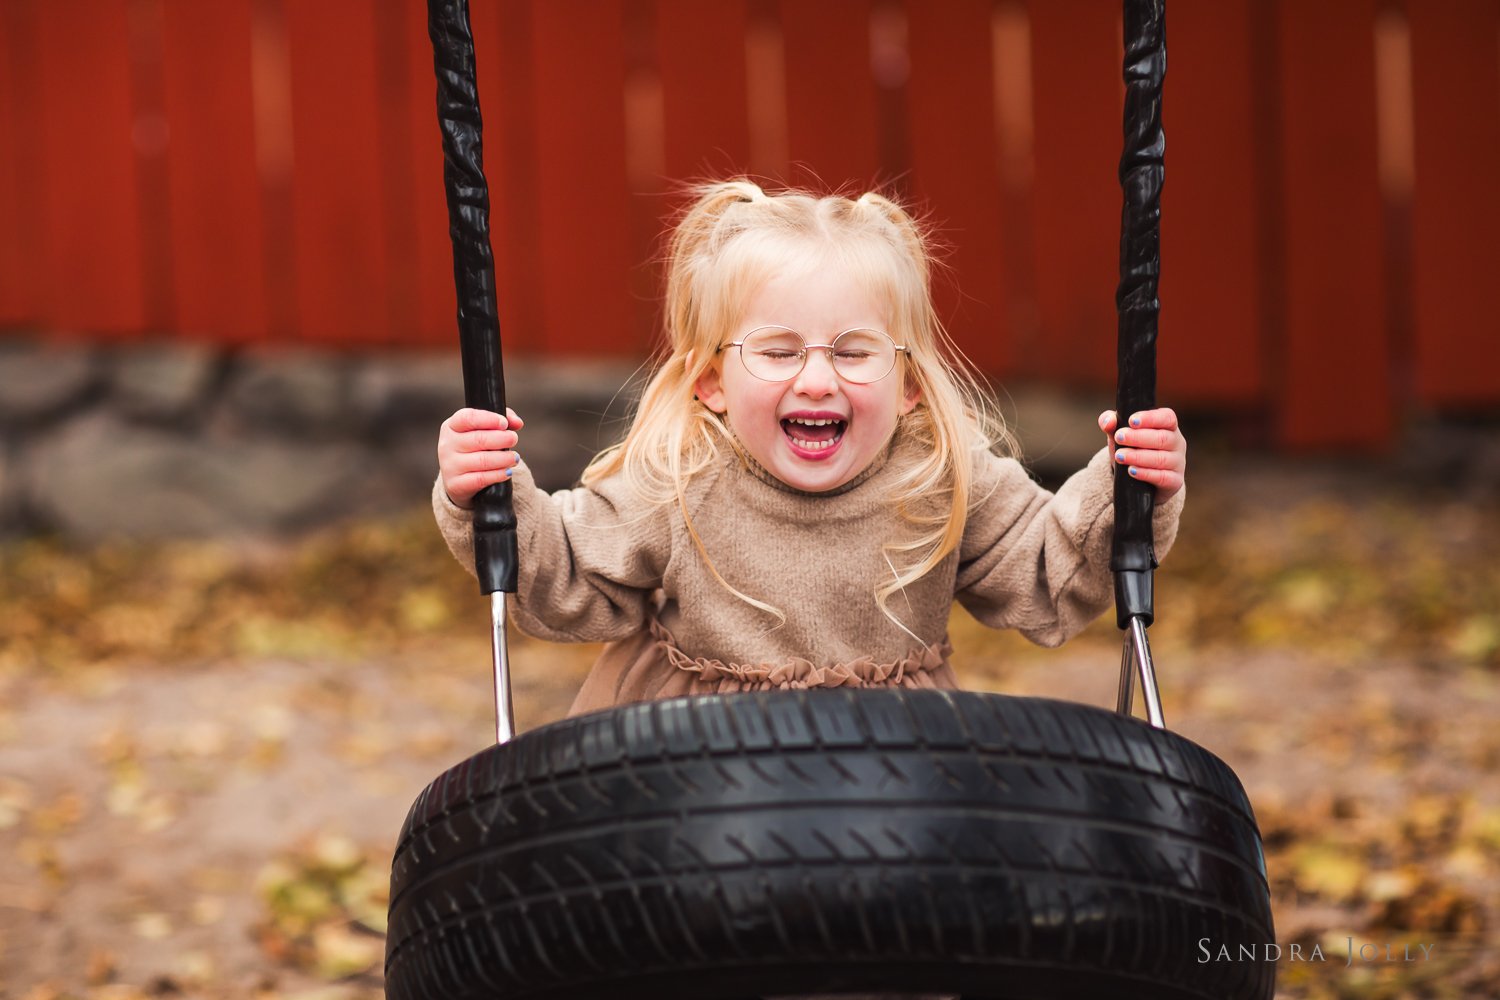 girl-on-a-swing-near-red-fence-in-stockholm.jpg